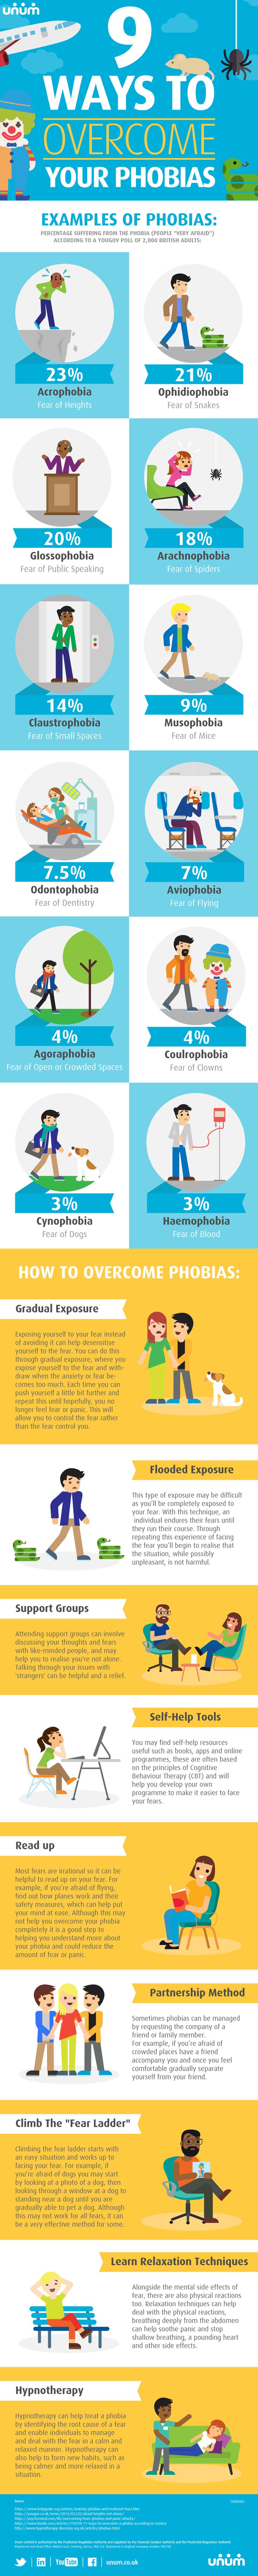 Psychology-Infographic-9-ways-to-overcome-your-phobias-infographic Psychology Infographic : 9 ways to overcome your phobias #infographic